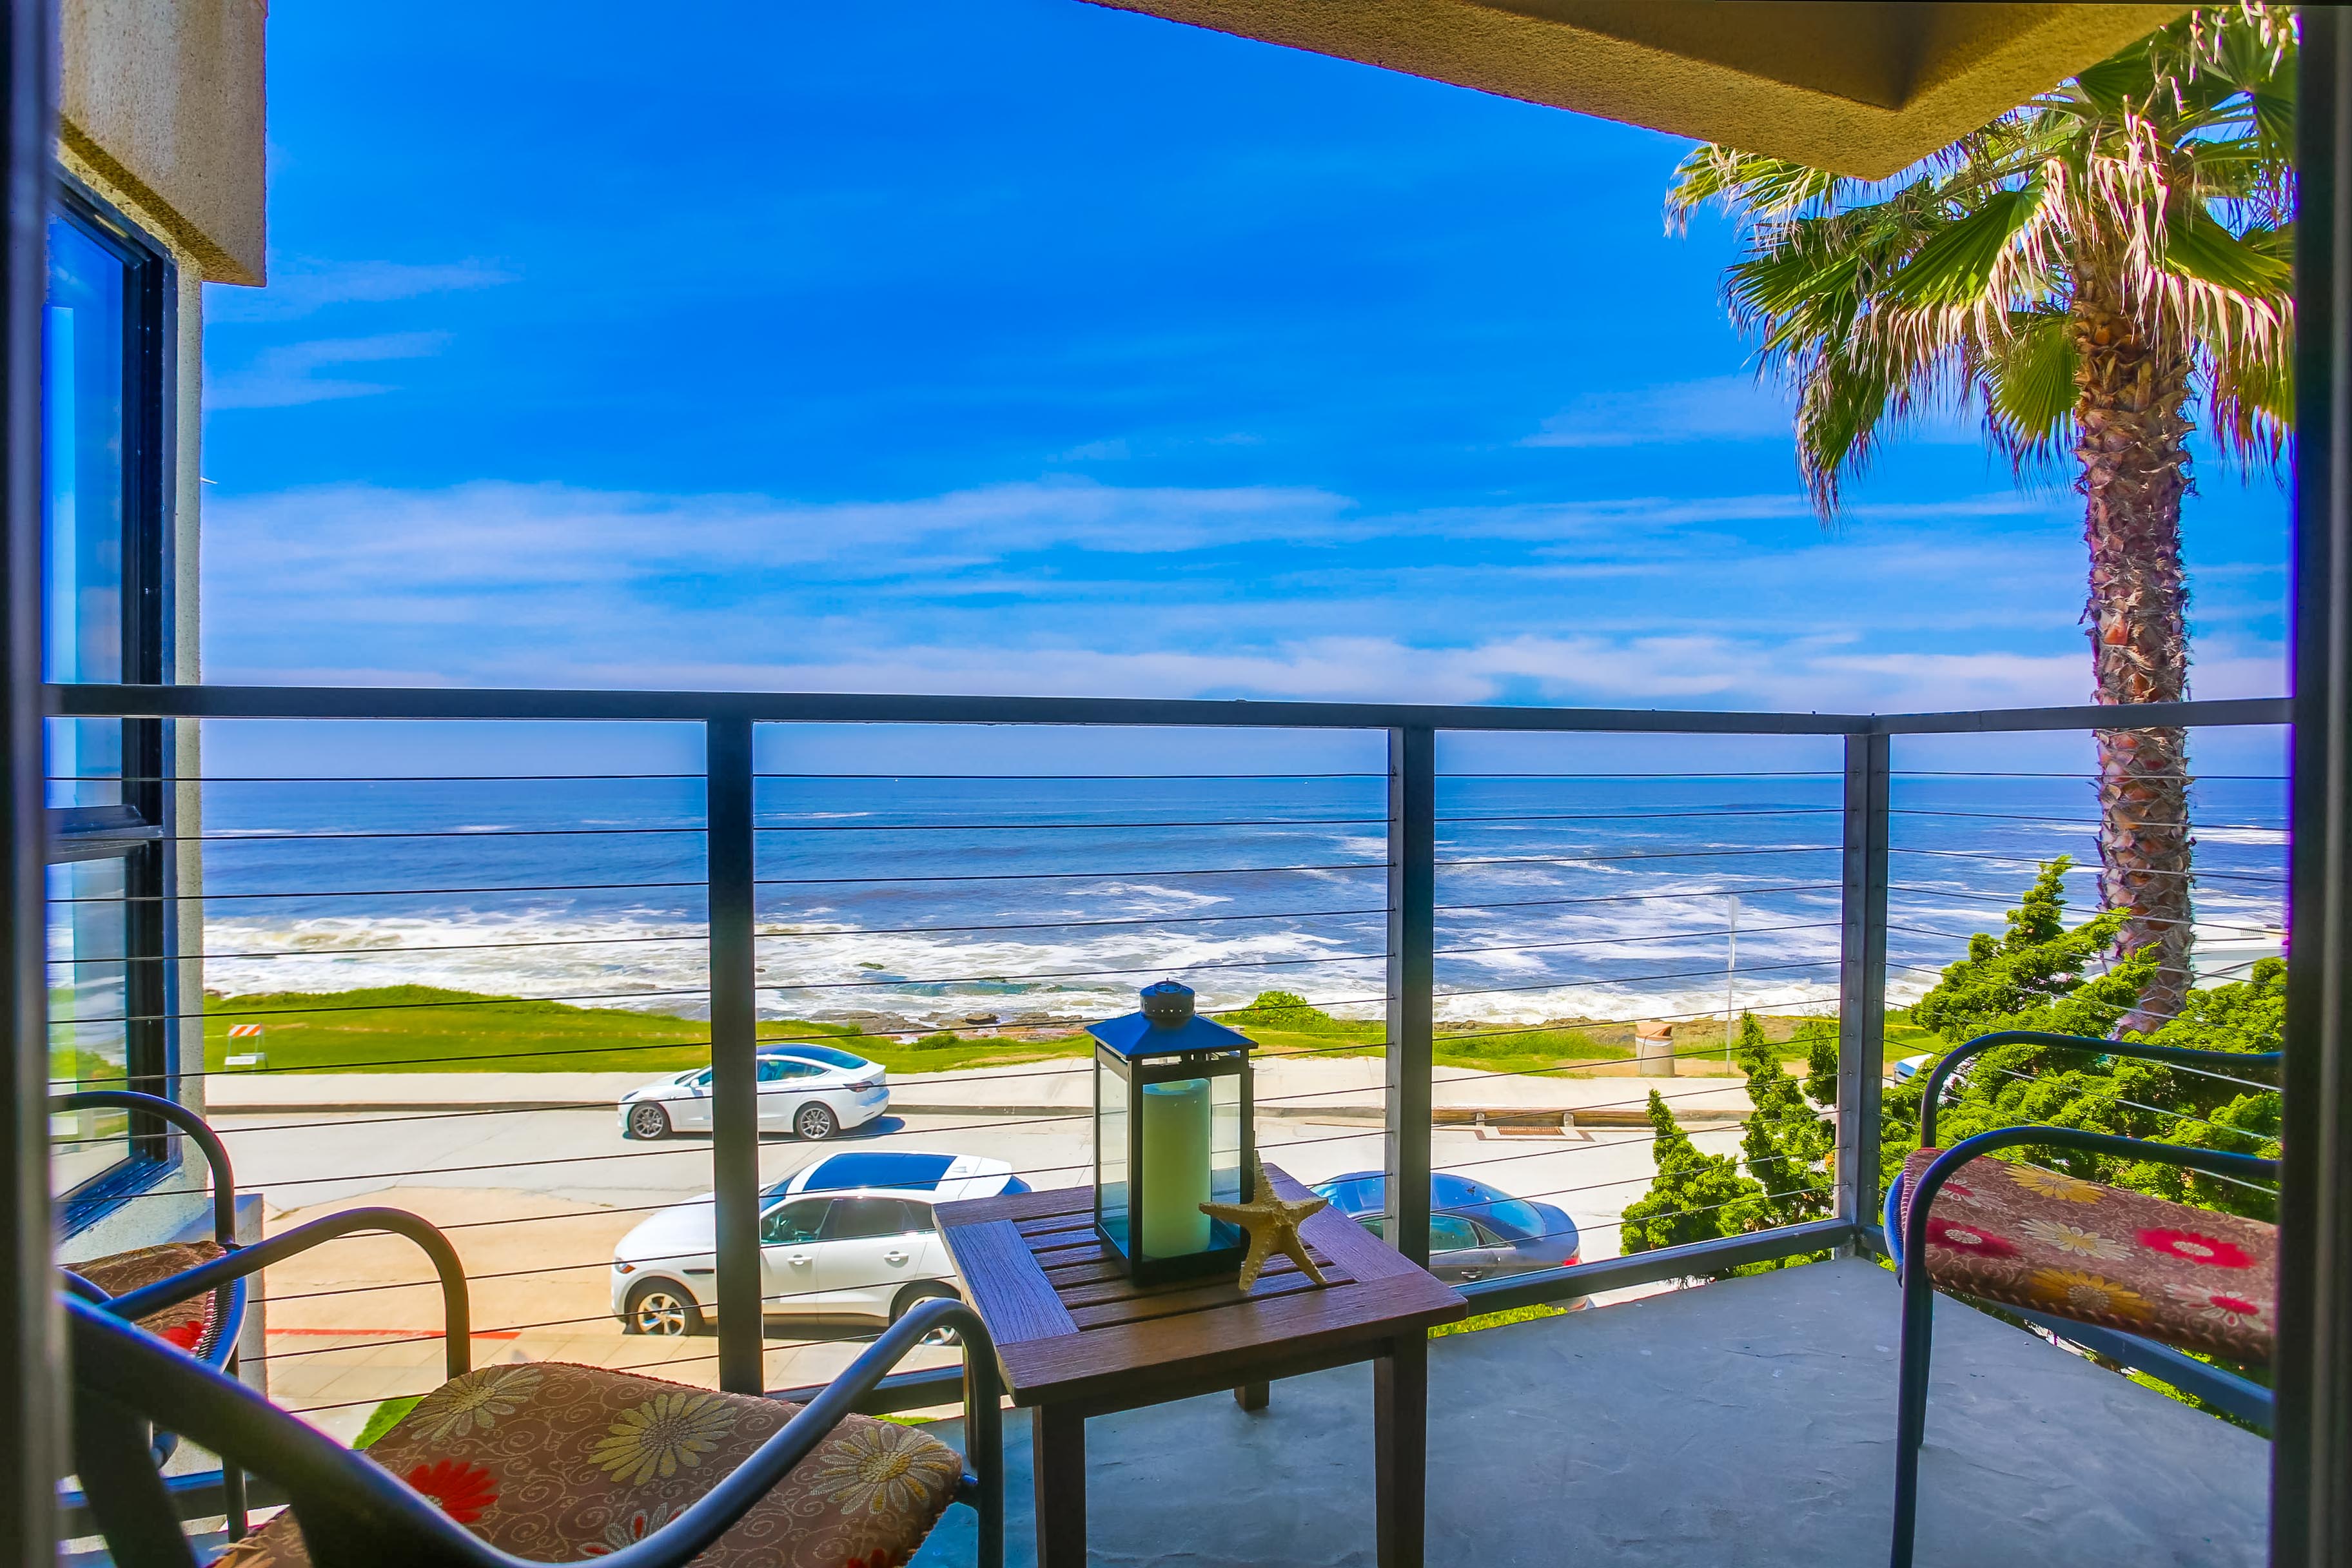 Perfect Sunsets... 2 Bedroom - 2 Bath condo with unobstructed views of the ocean